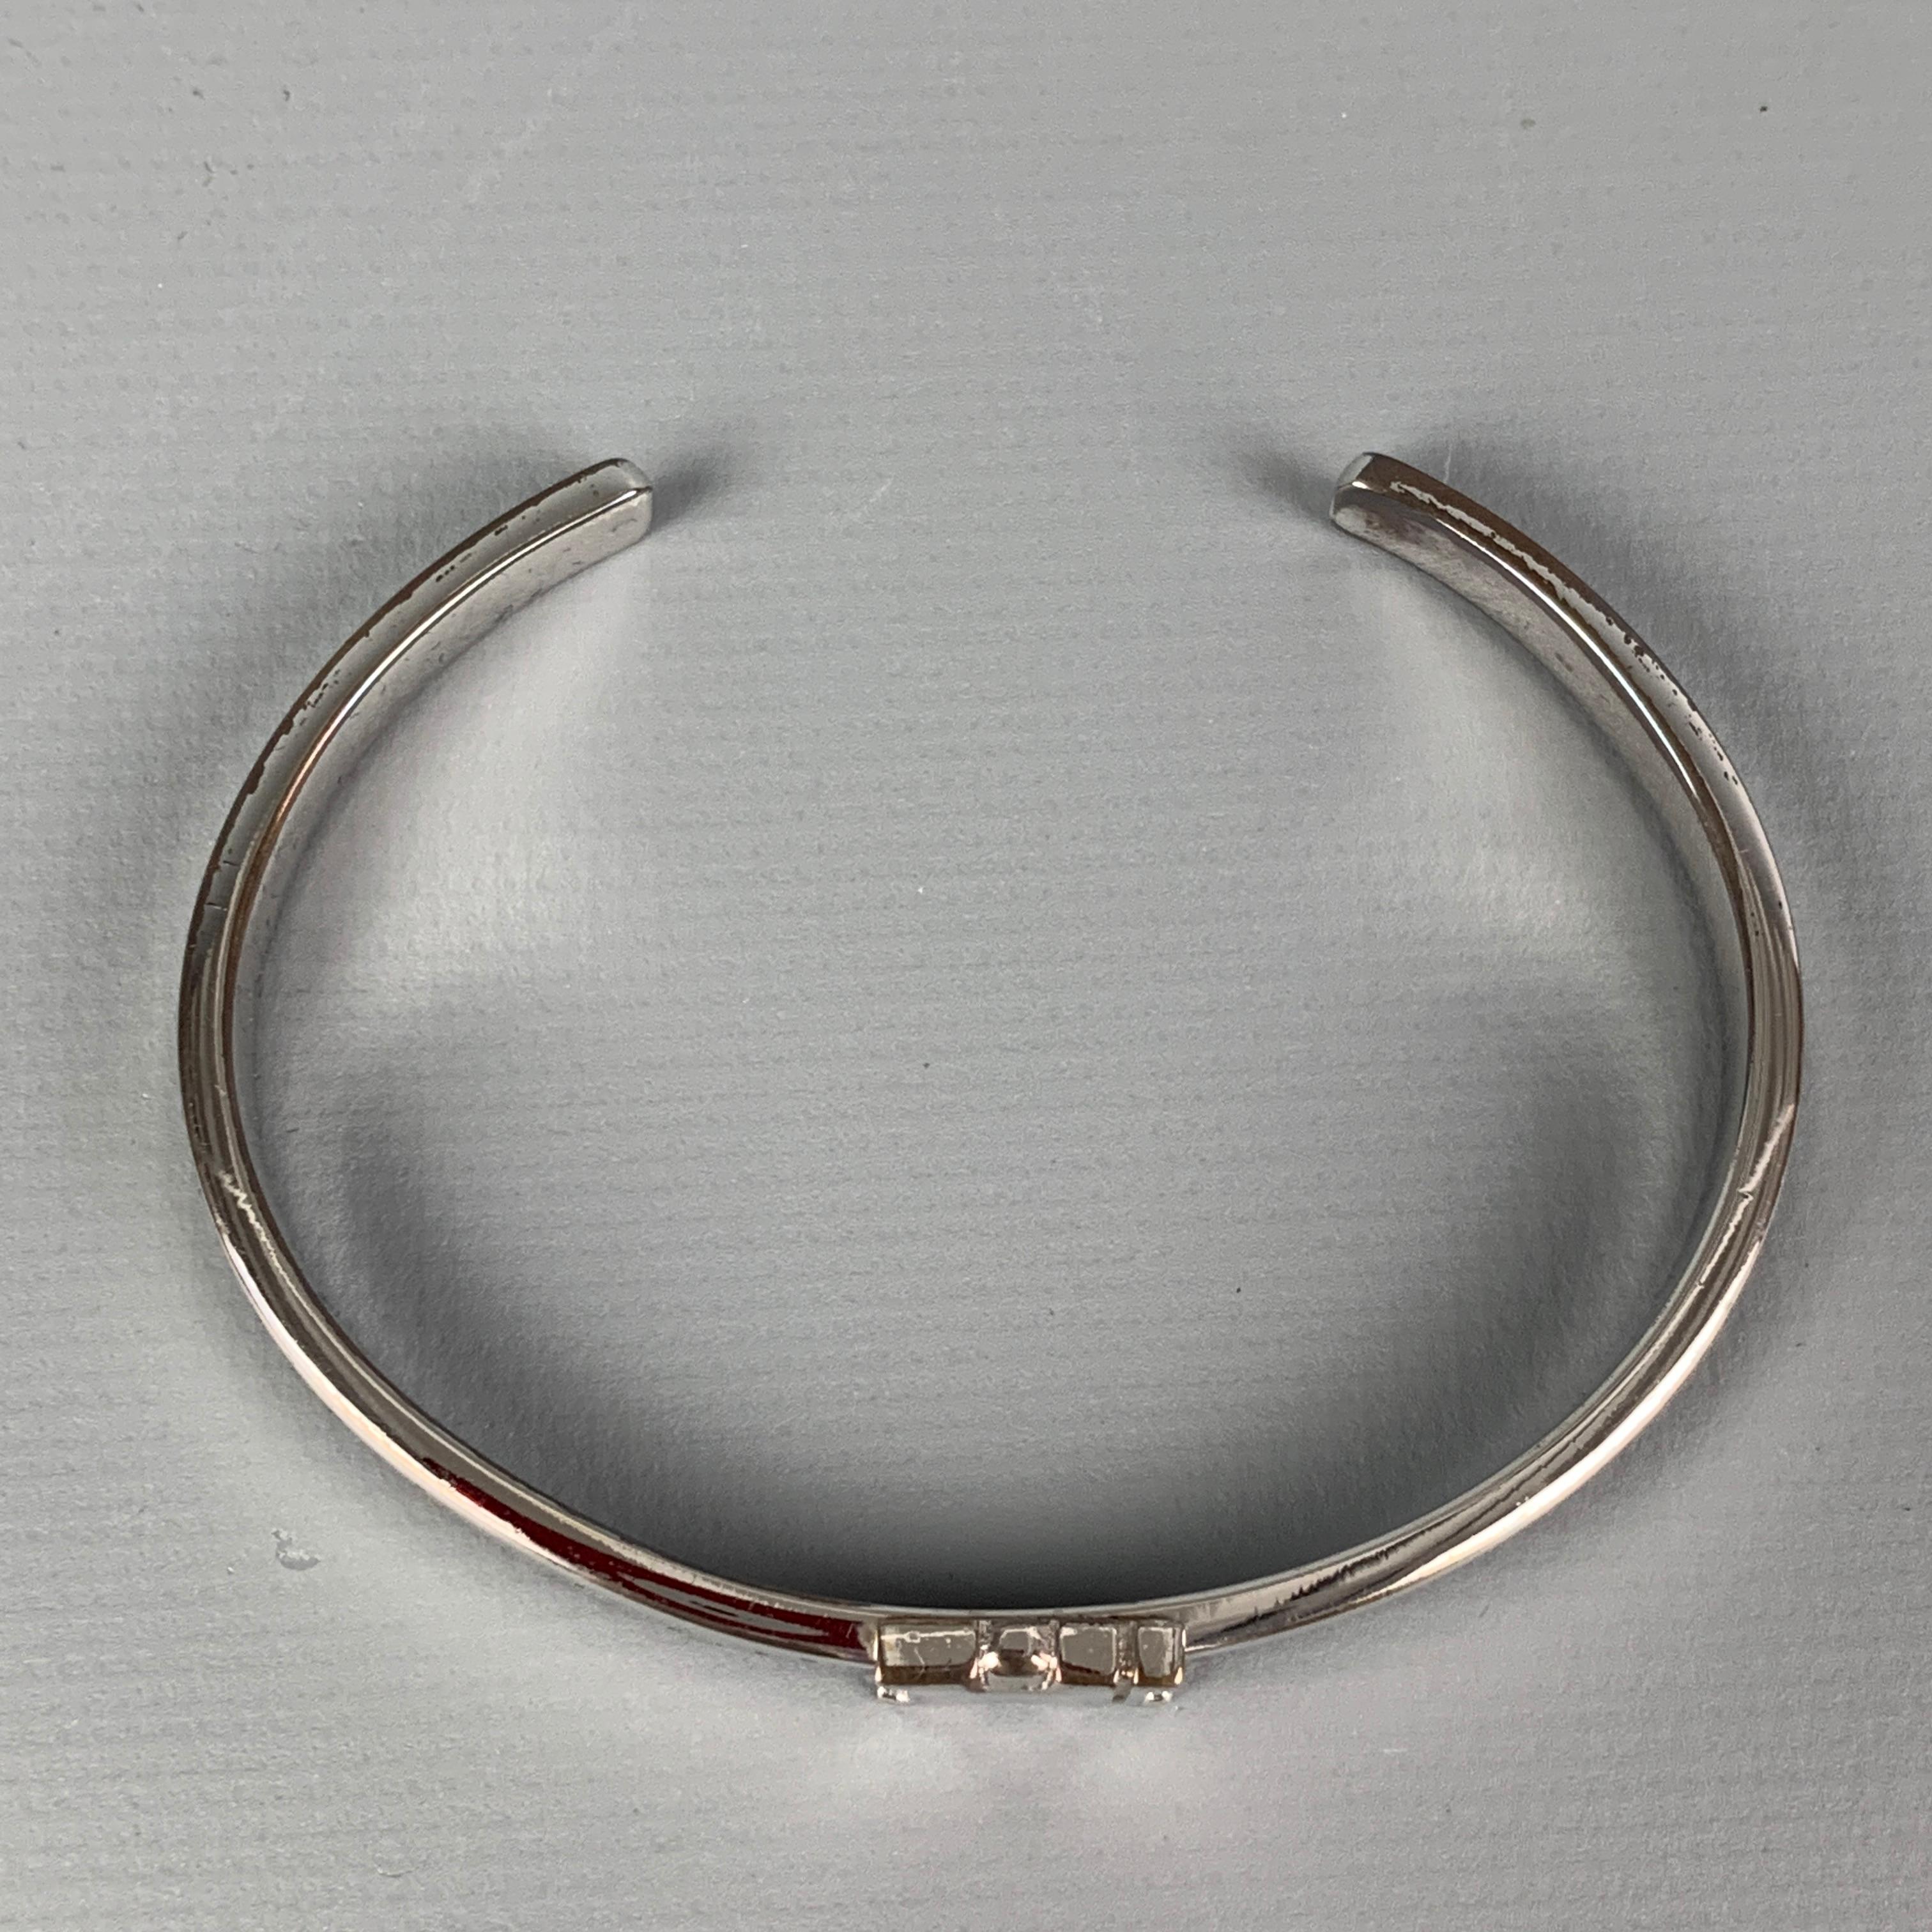 ALAN CROCETTI 'Unity' bracelet comes in sterling silver featuring a cuff style. Comes with box.

Very Good Pre-Owned Condition.

Measurements:

Fits: 2.5 in.